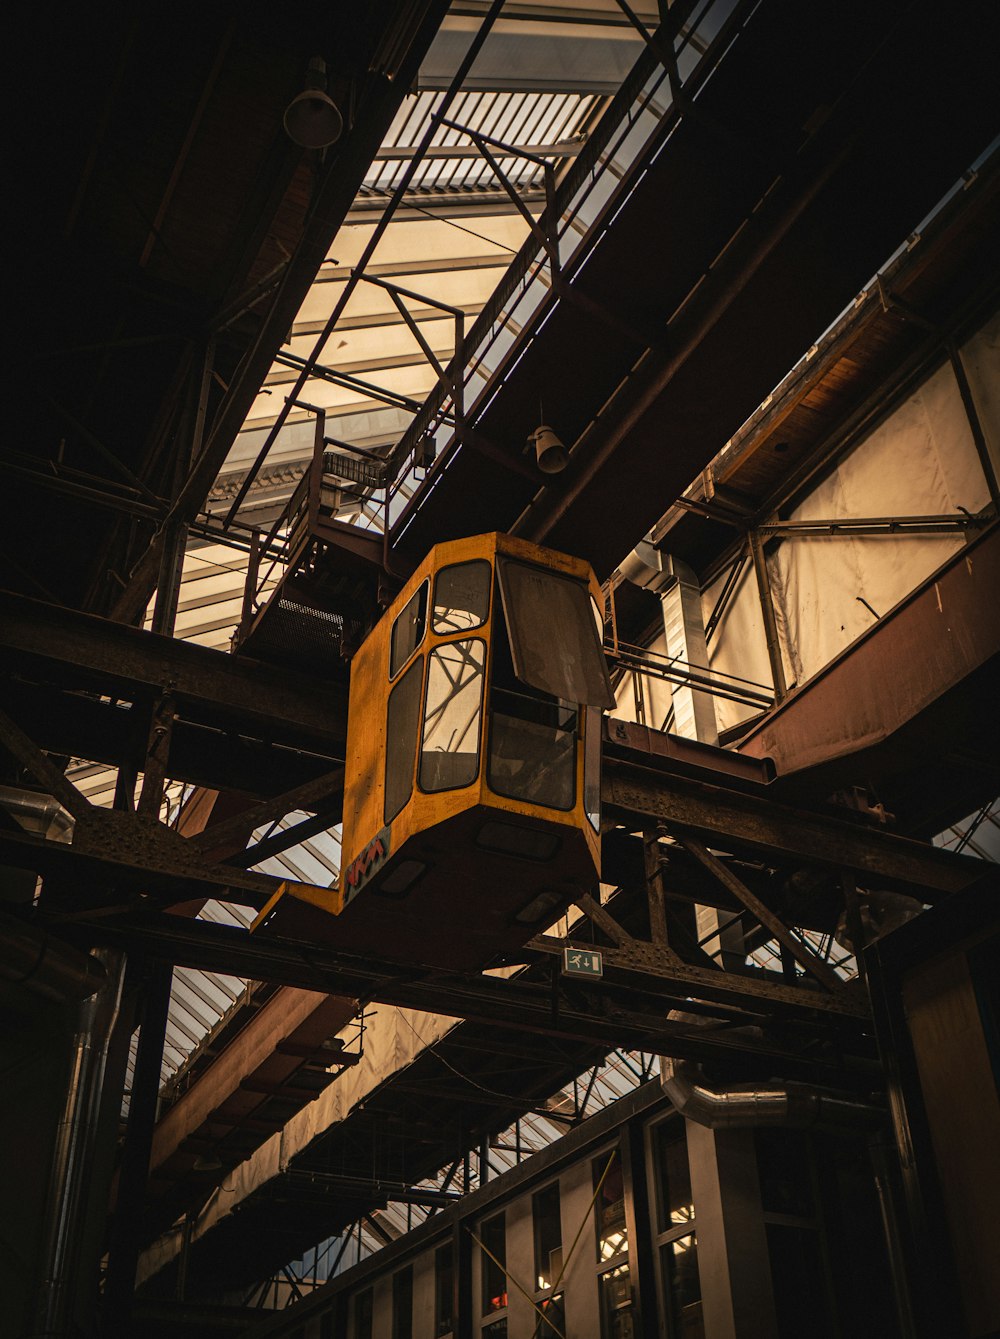 a yellow train sitting inside of a train station